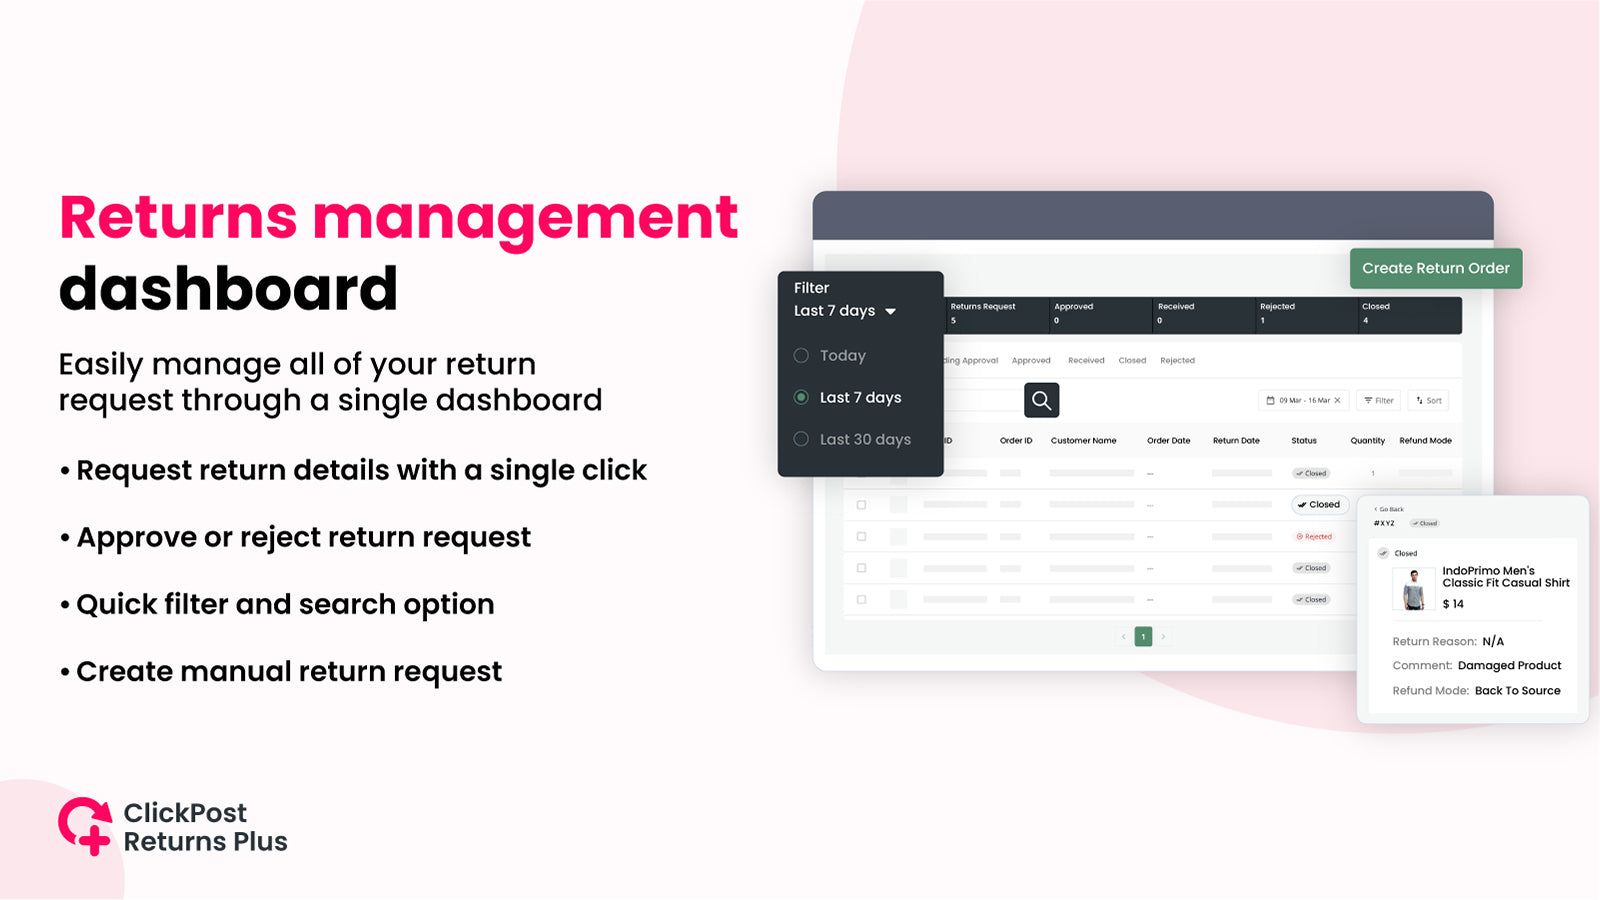 Returns management dashboard to accept or reject return requests